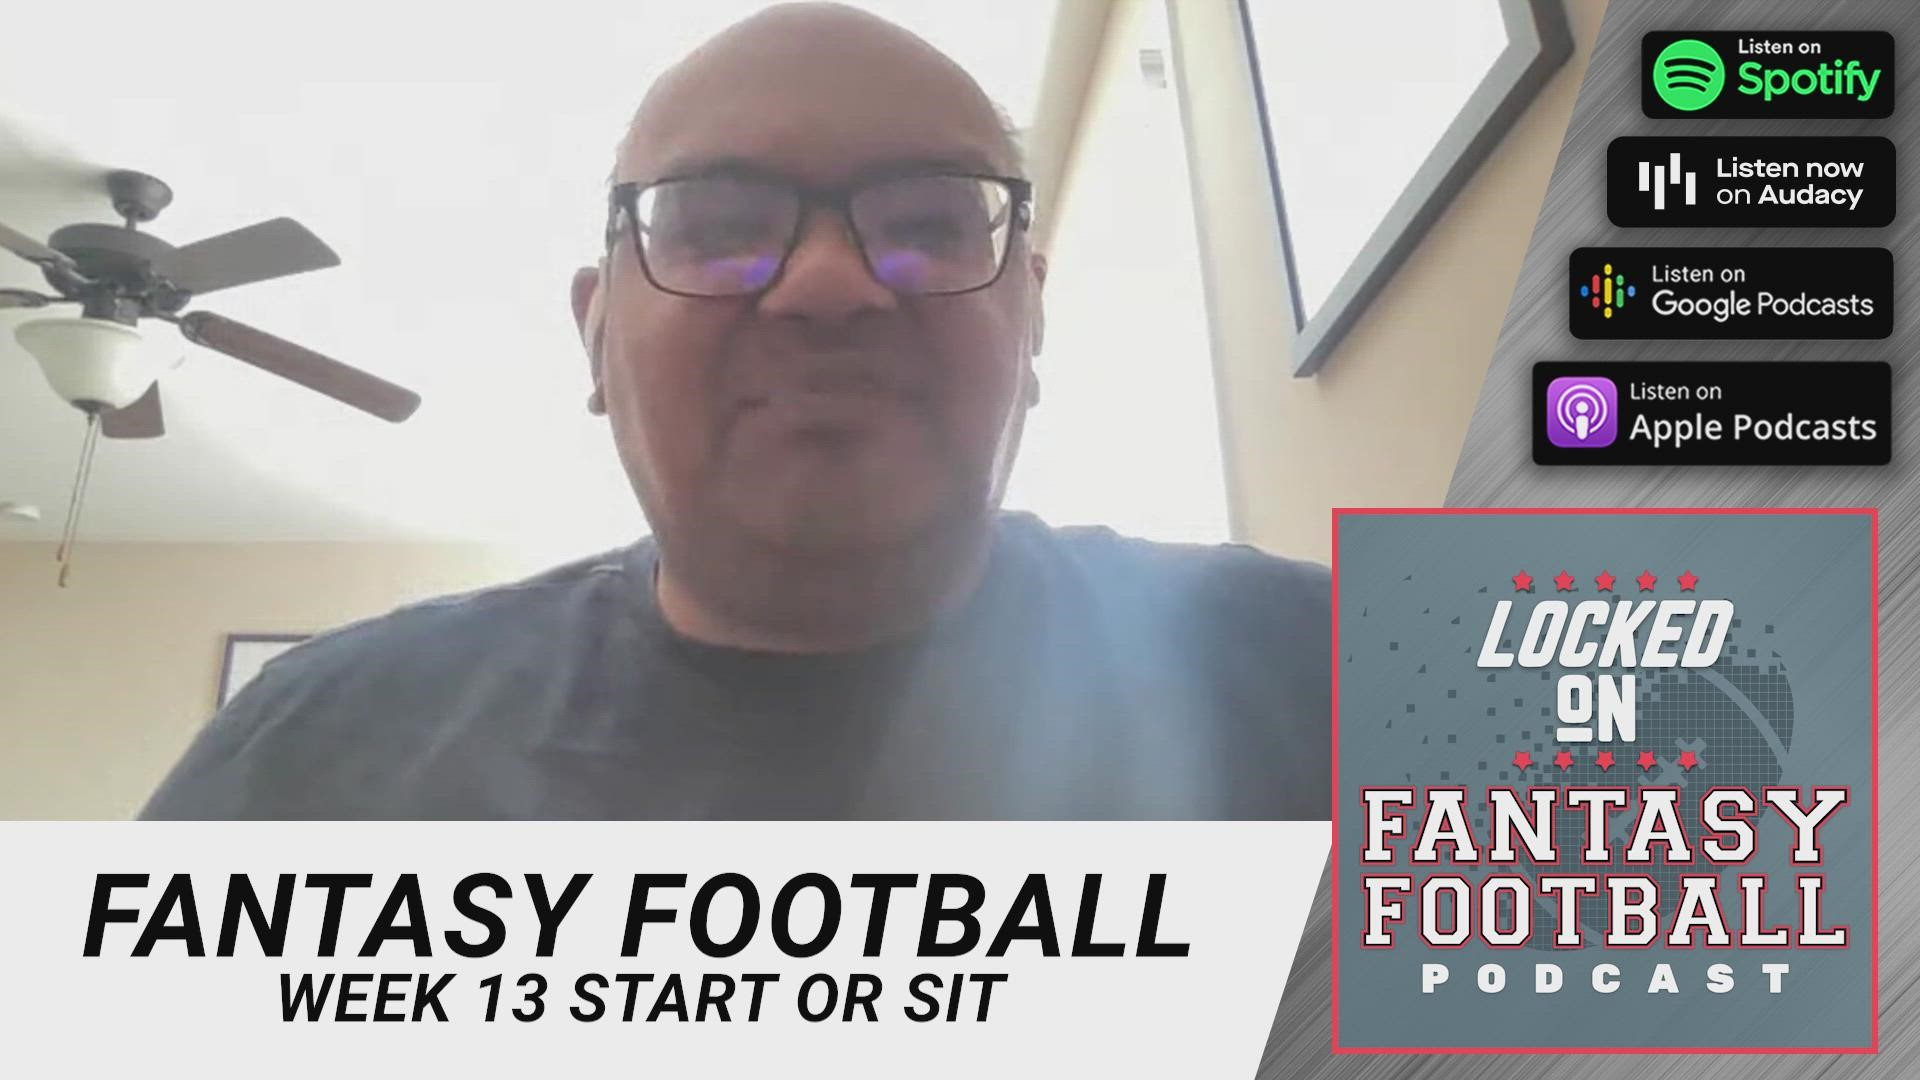 Locked On Fantasy Football host Vinnie Iyer has advice for your fantasy football lineups in Week 13.